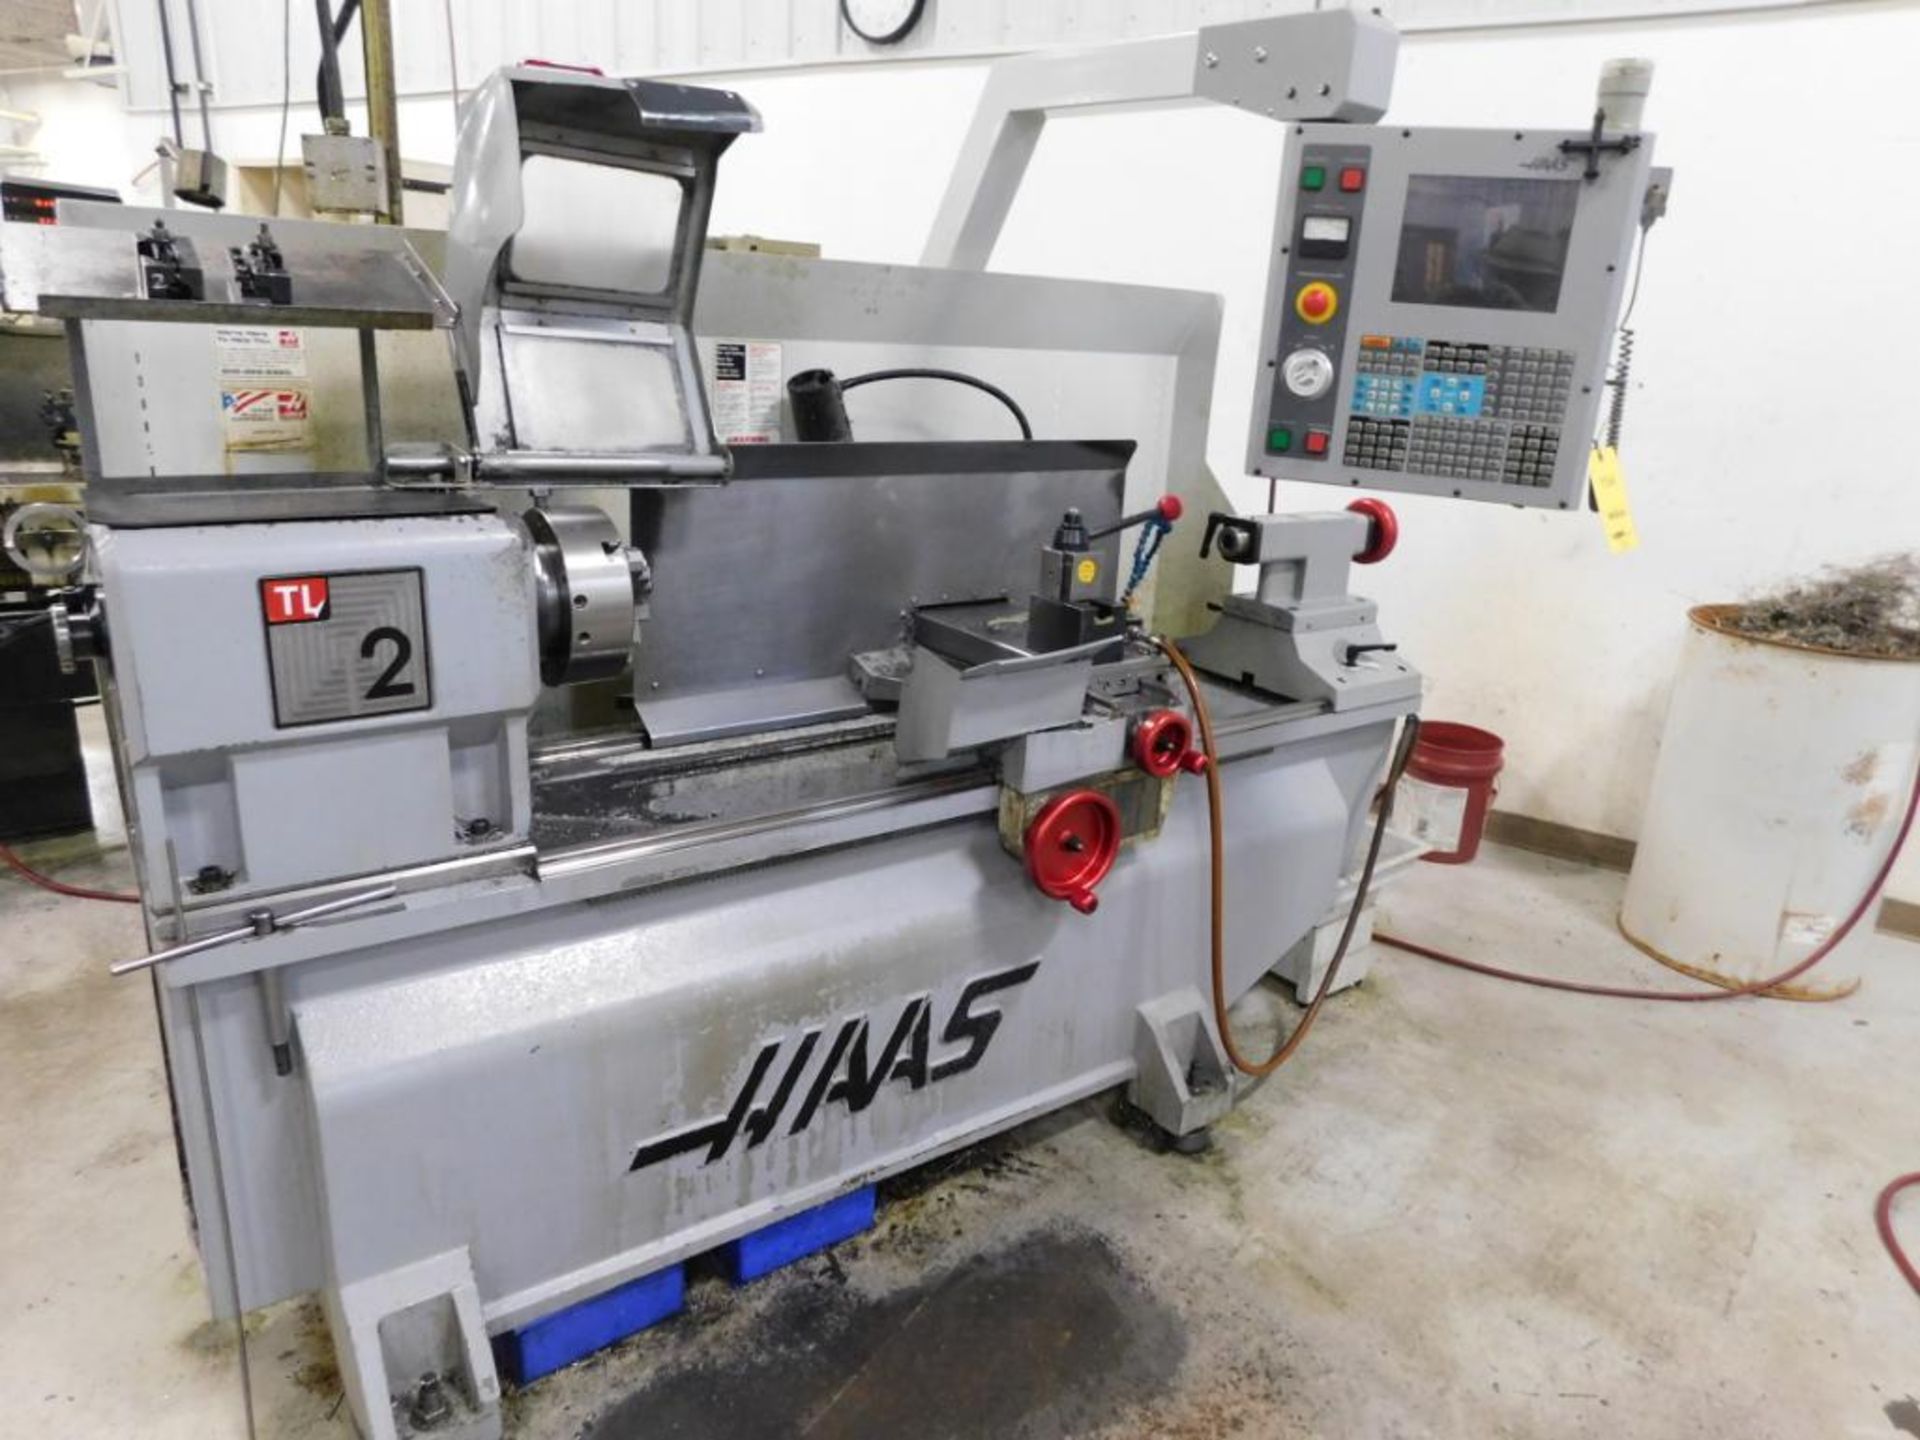 Haas CNC Lathe, Model l2, S/N 70438 (2013), 1800 PM, 12 HP, 10 in. Chuck, 16 in. x 48 in., 8 in. X-A